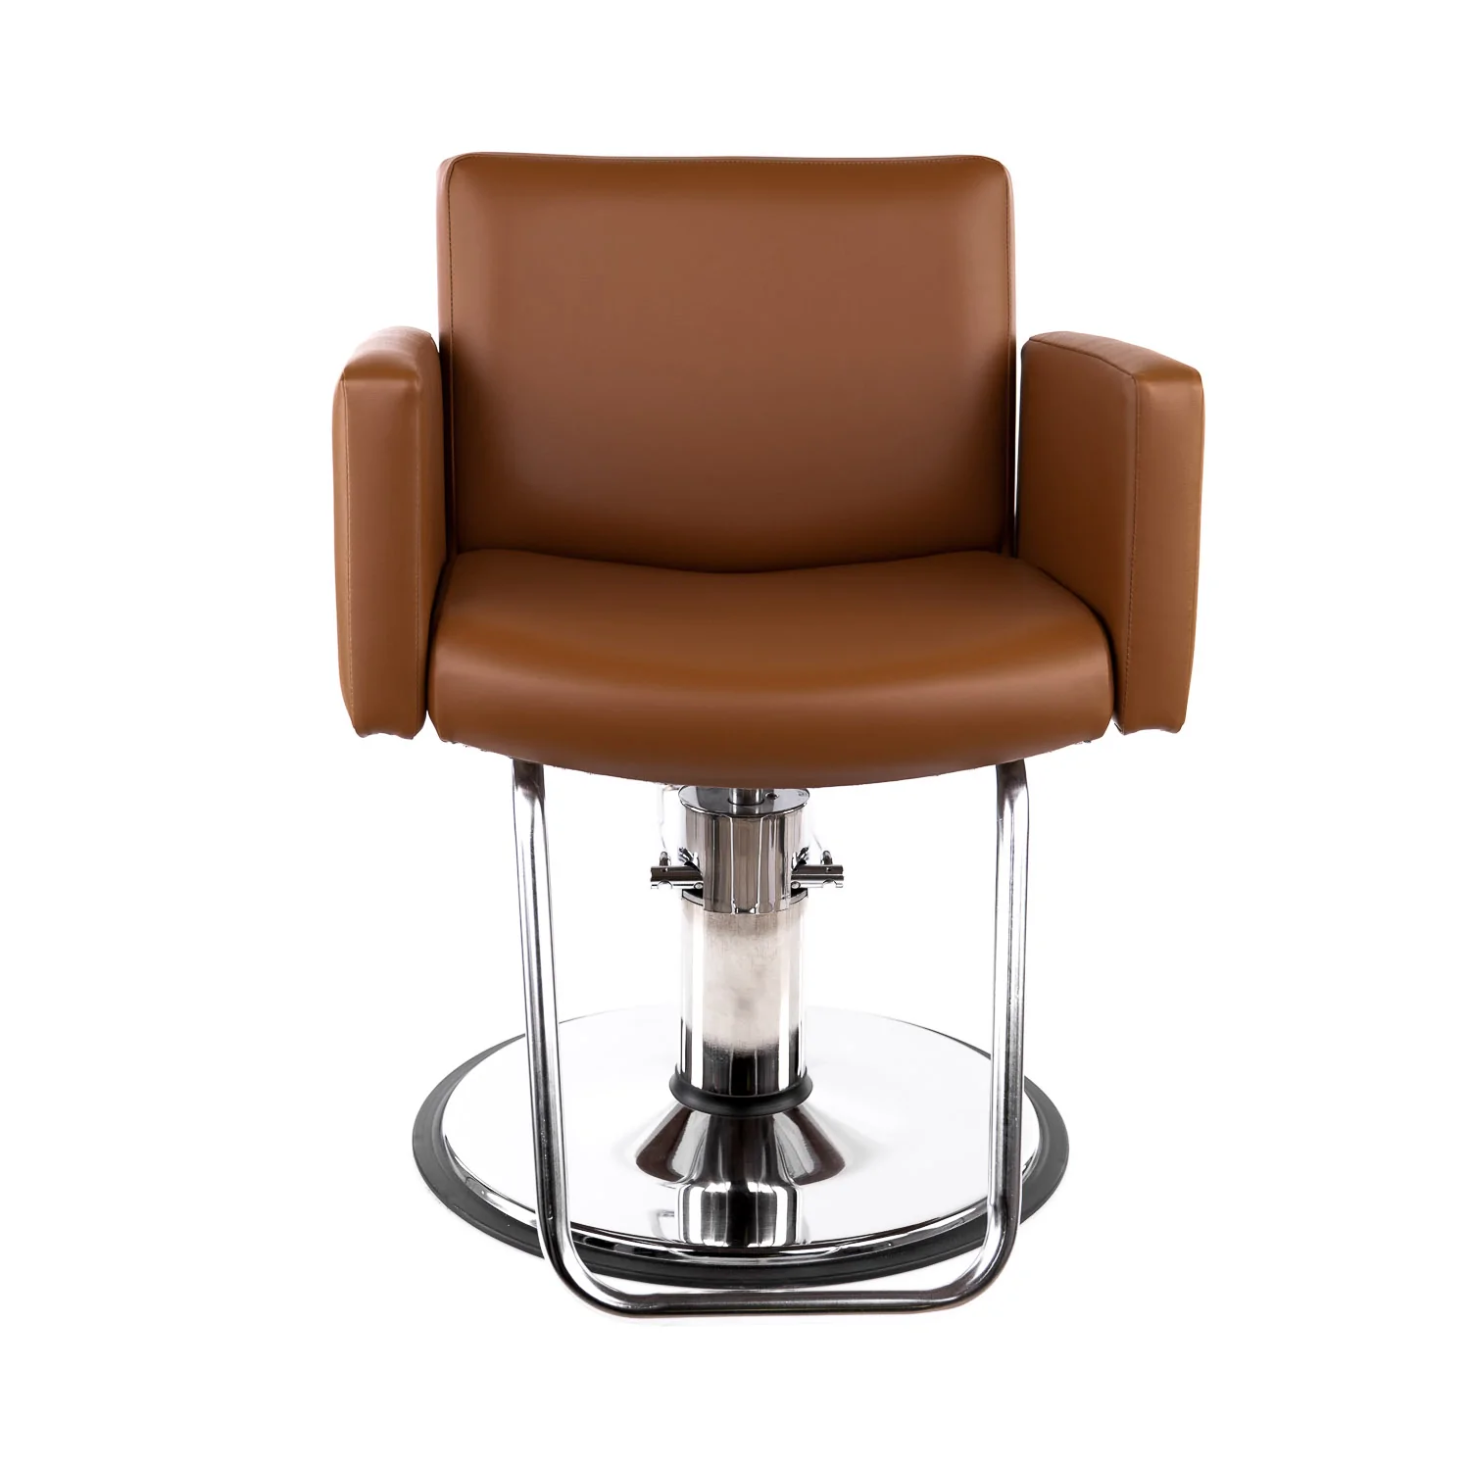 Collins Cigno Styling Chair